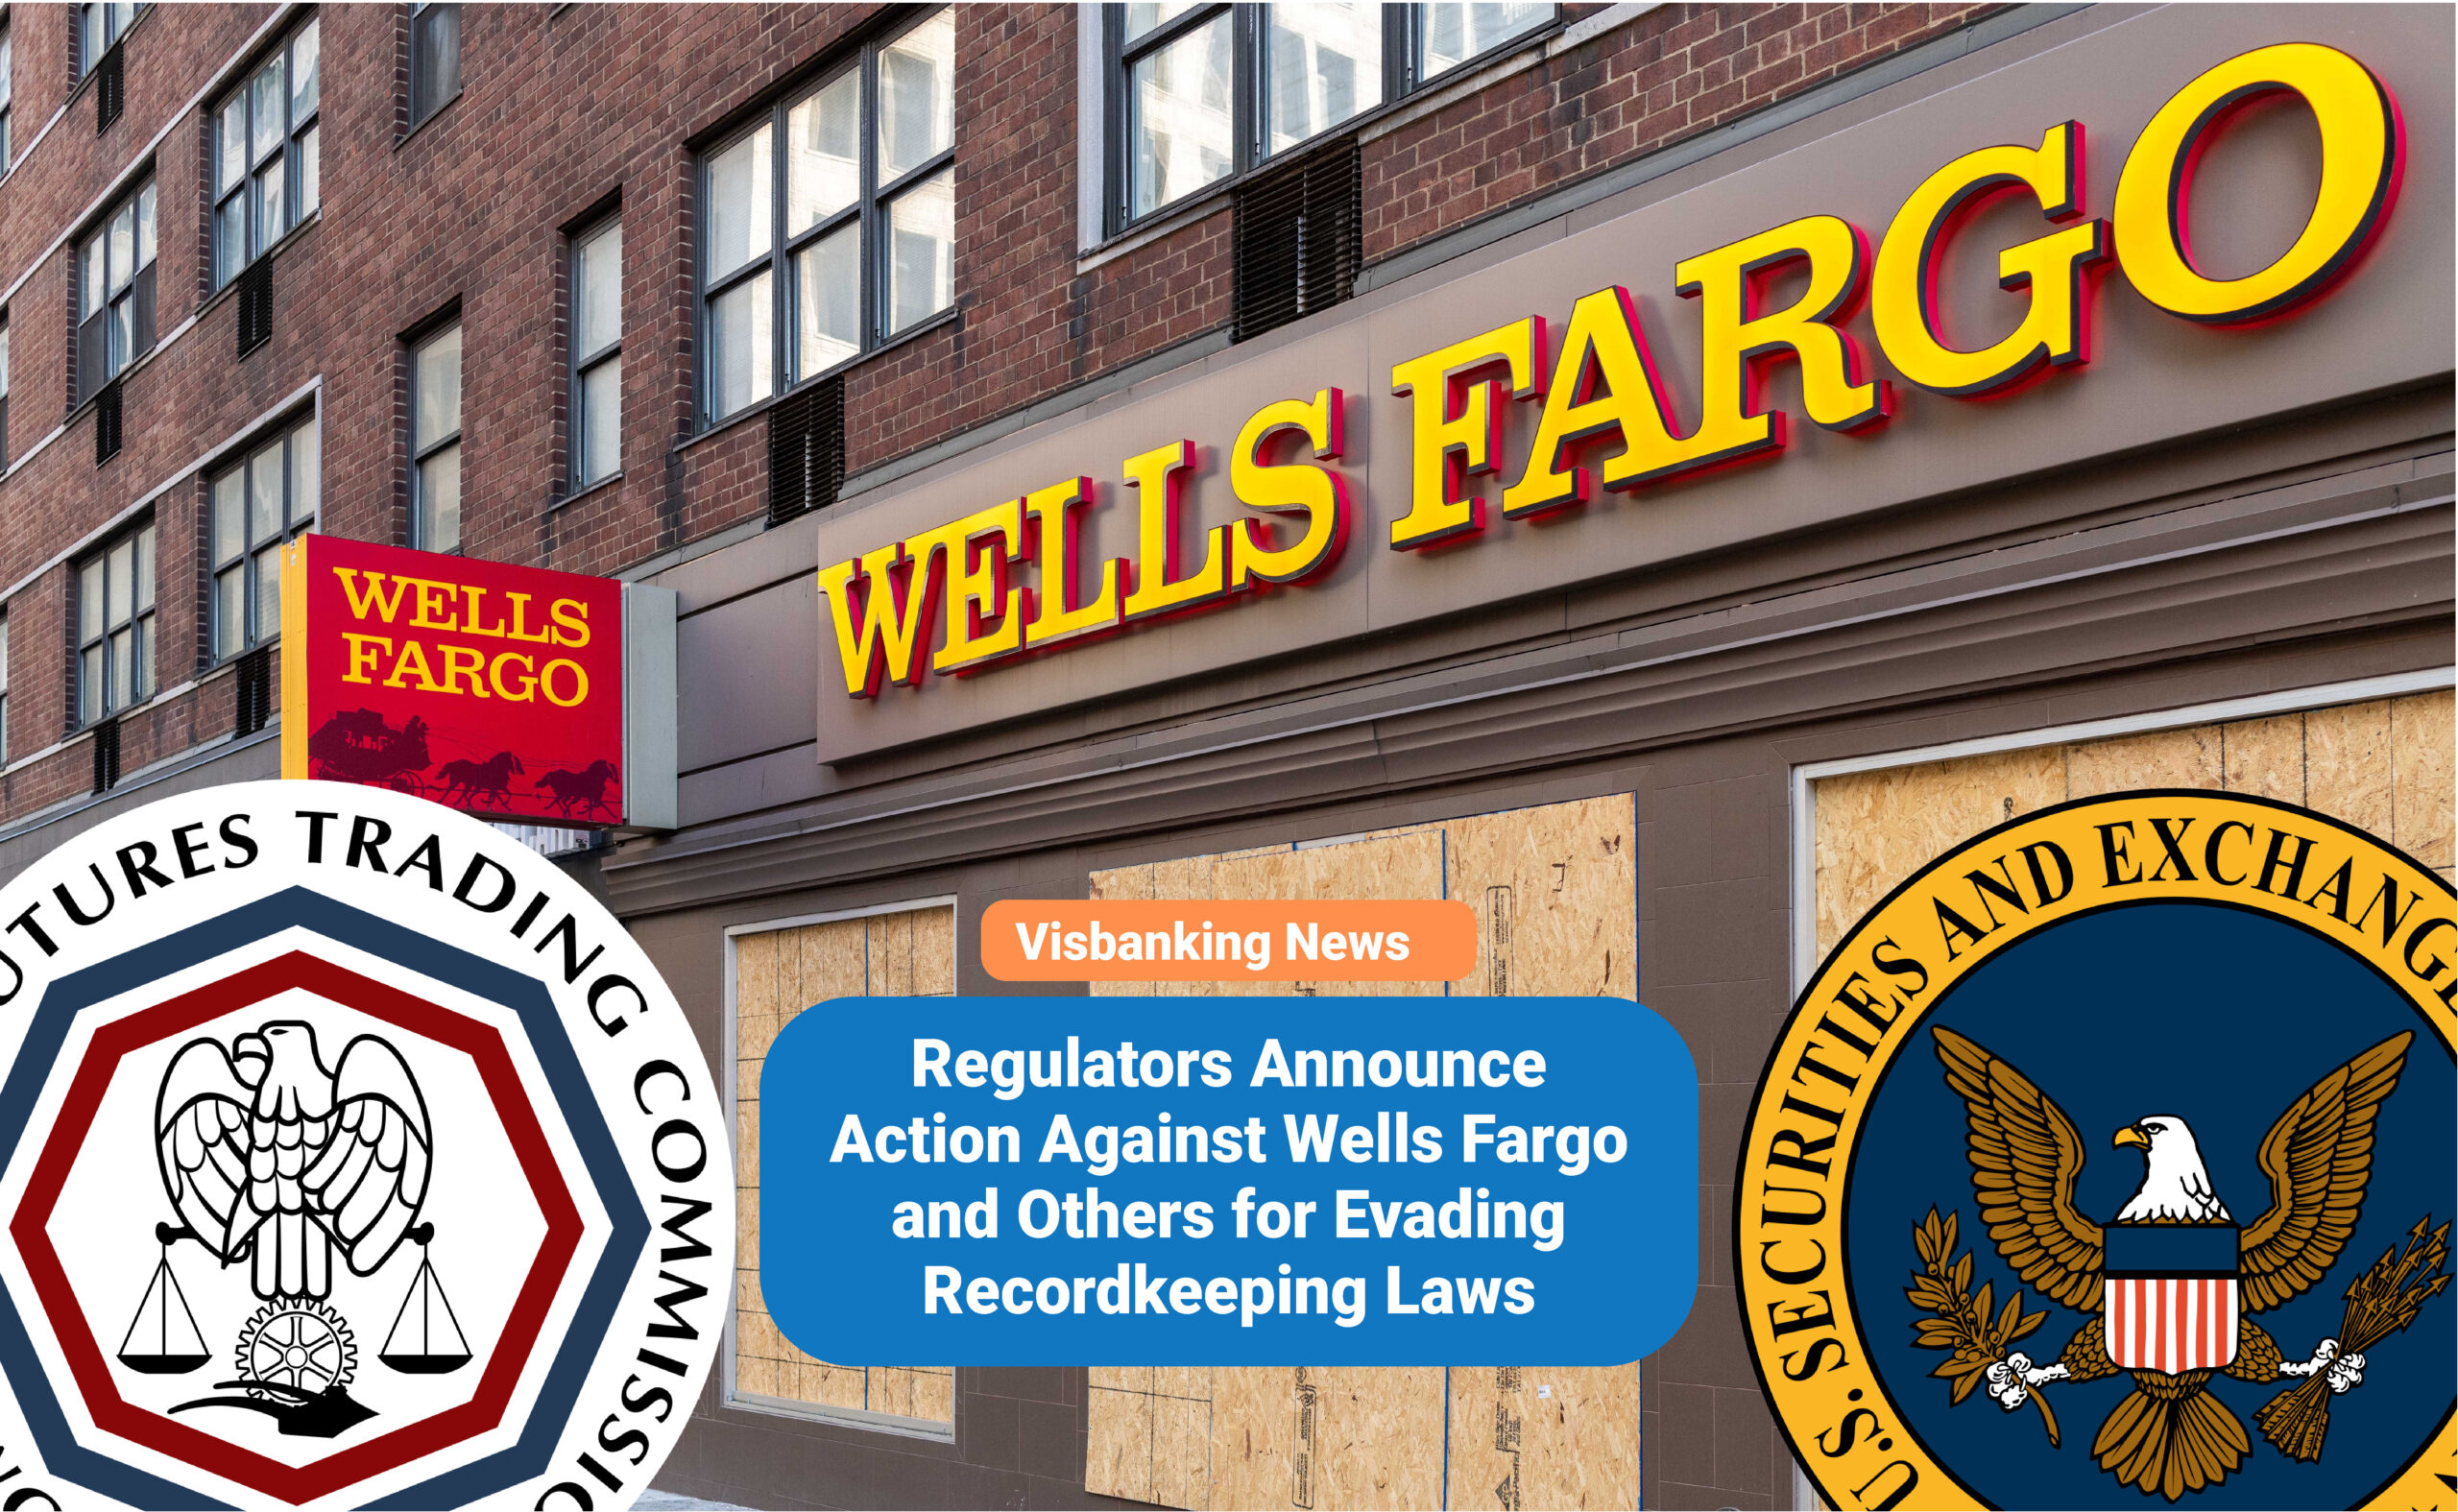 Regulators Announce Action Against Wells Fargo and Others for Evading Recordkeeping Laws